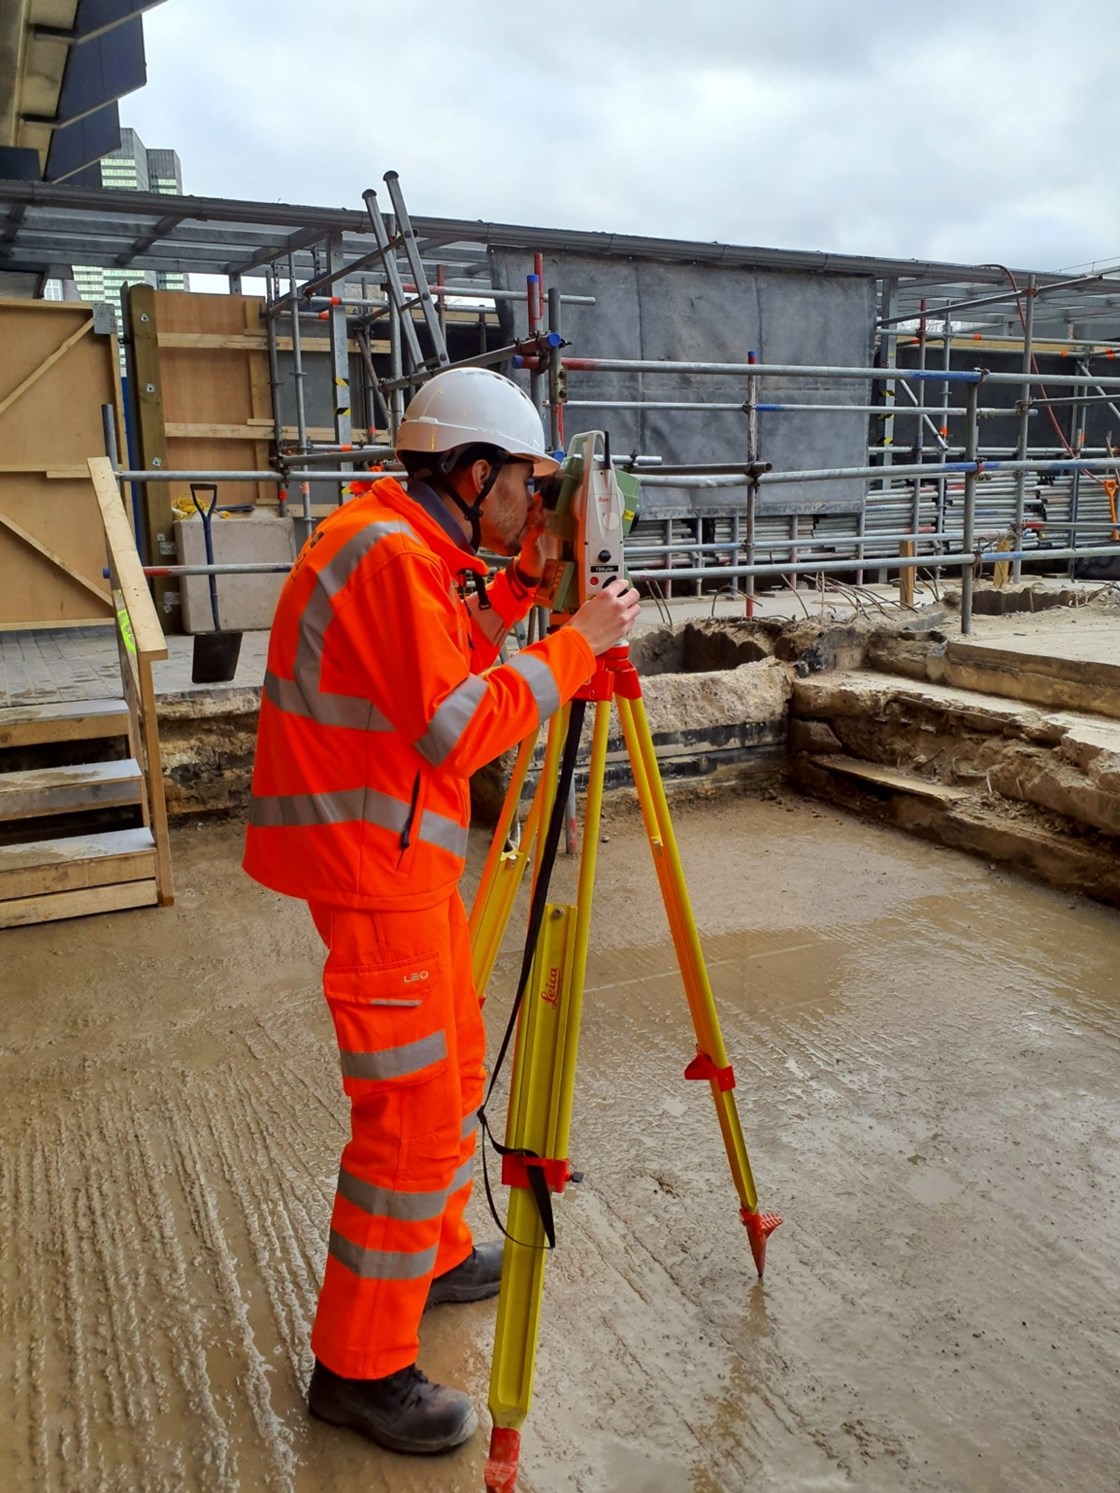 Leon is HS2's 900th apprentice and is studying for a Civil Engineering degree